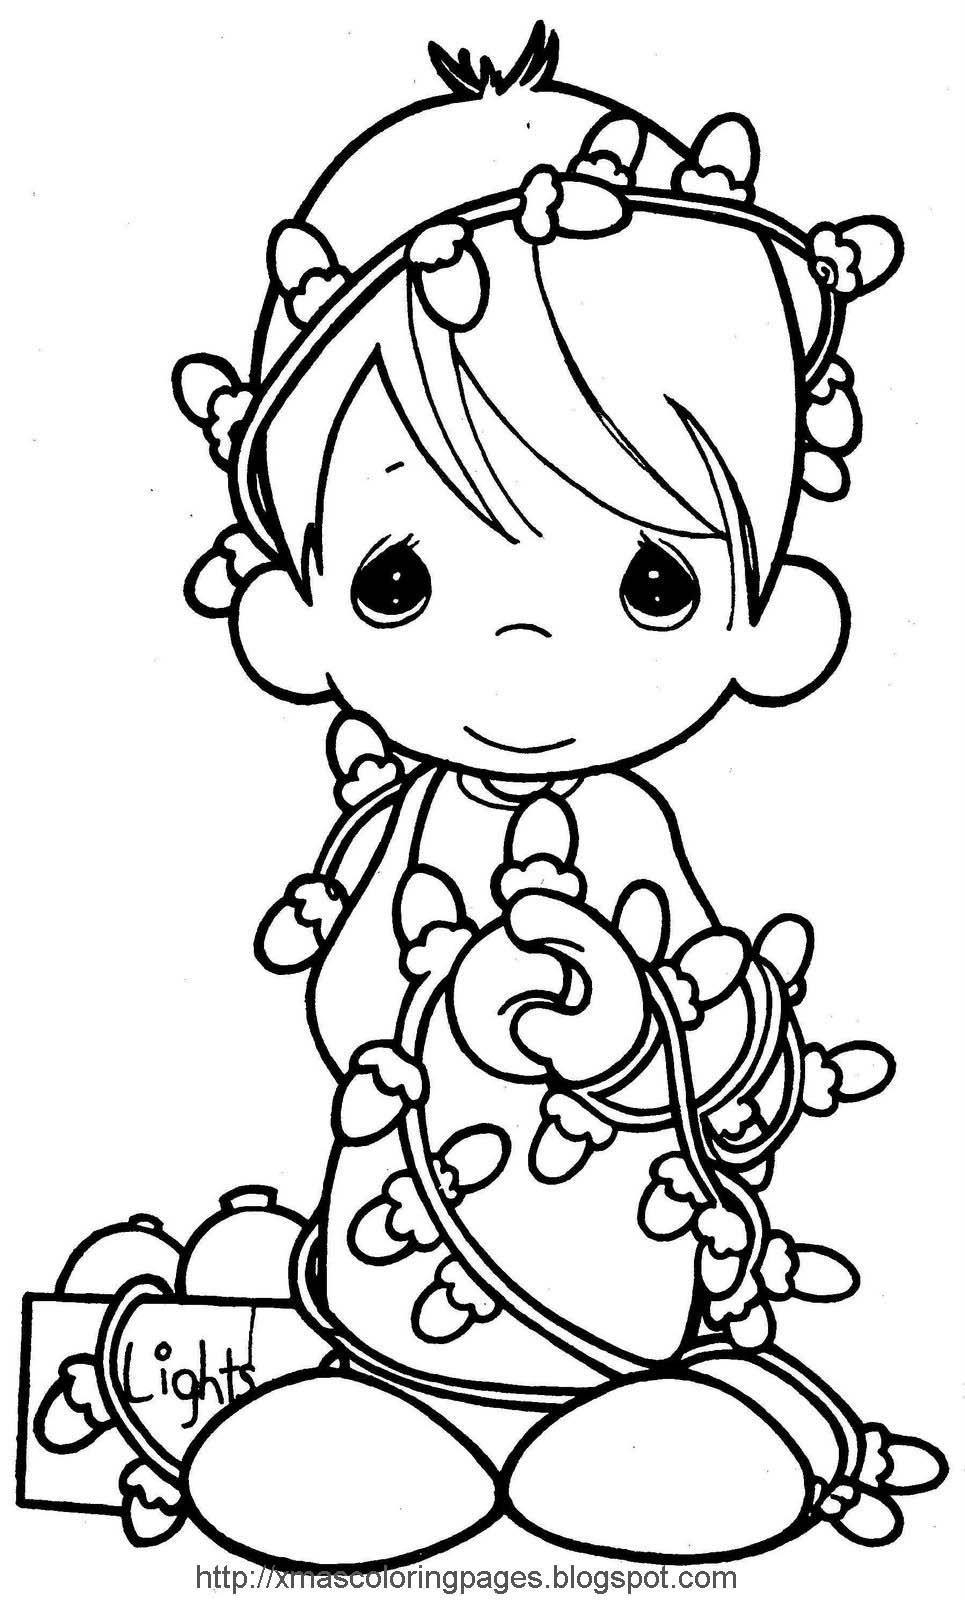 squid-army-christmas-coloring-pages-free